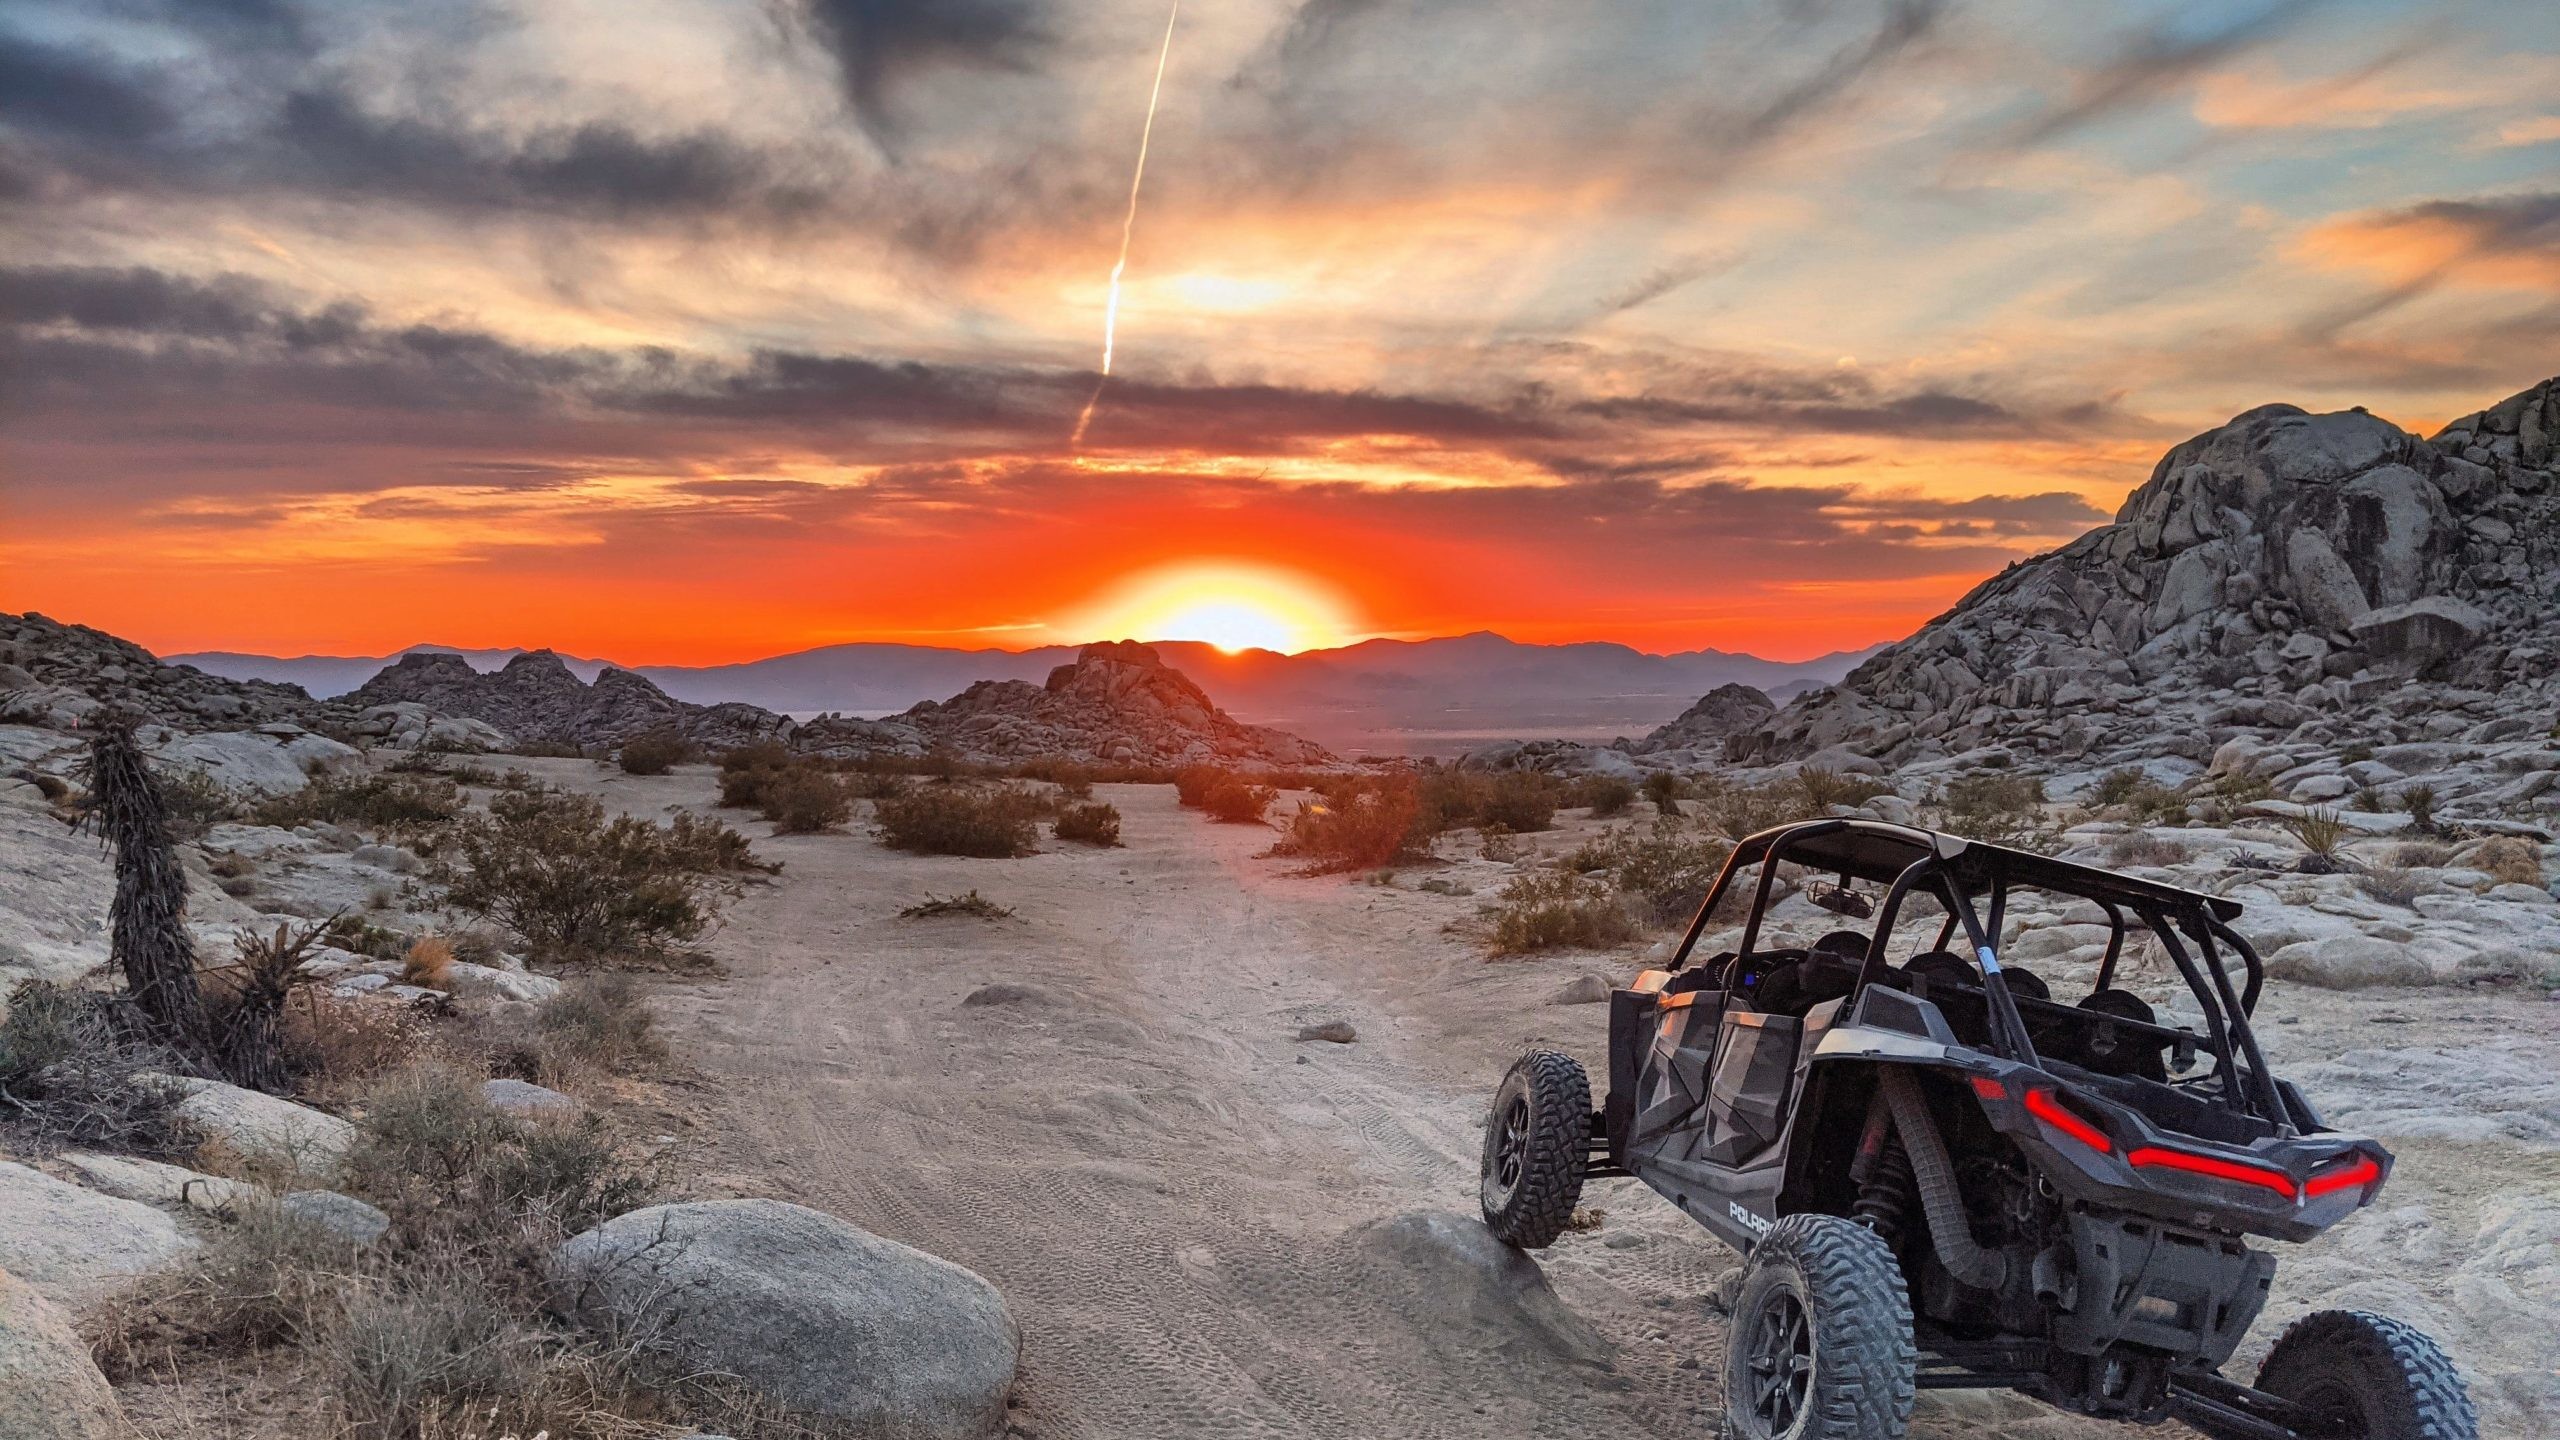 rzr turbo side by side rental at sunset